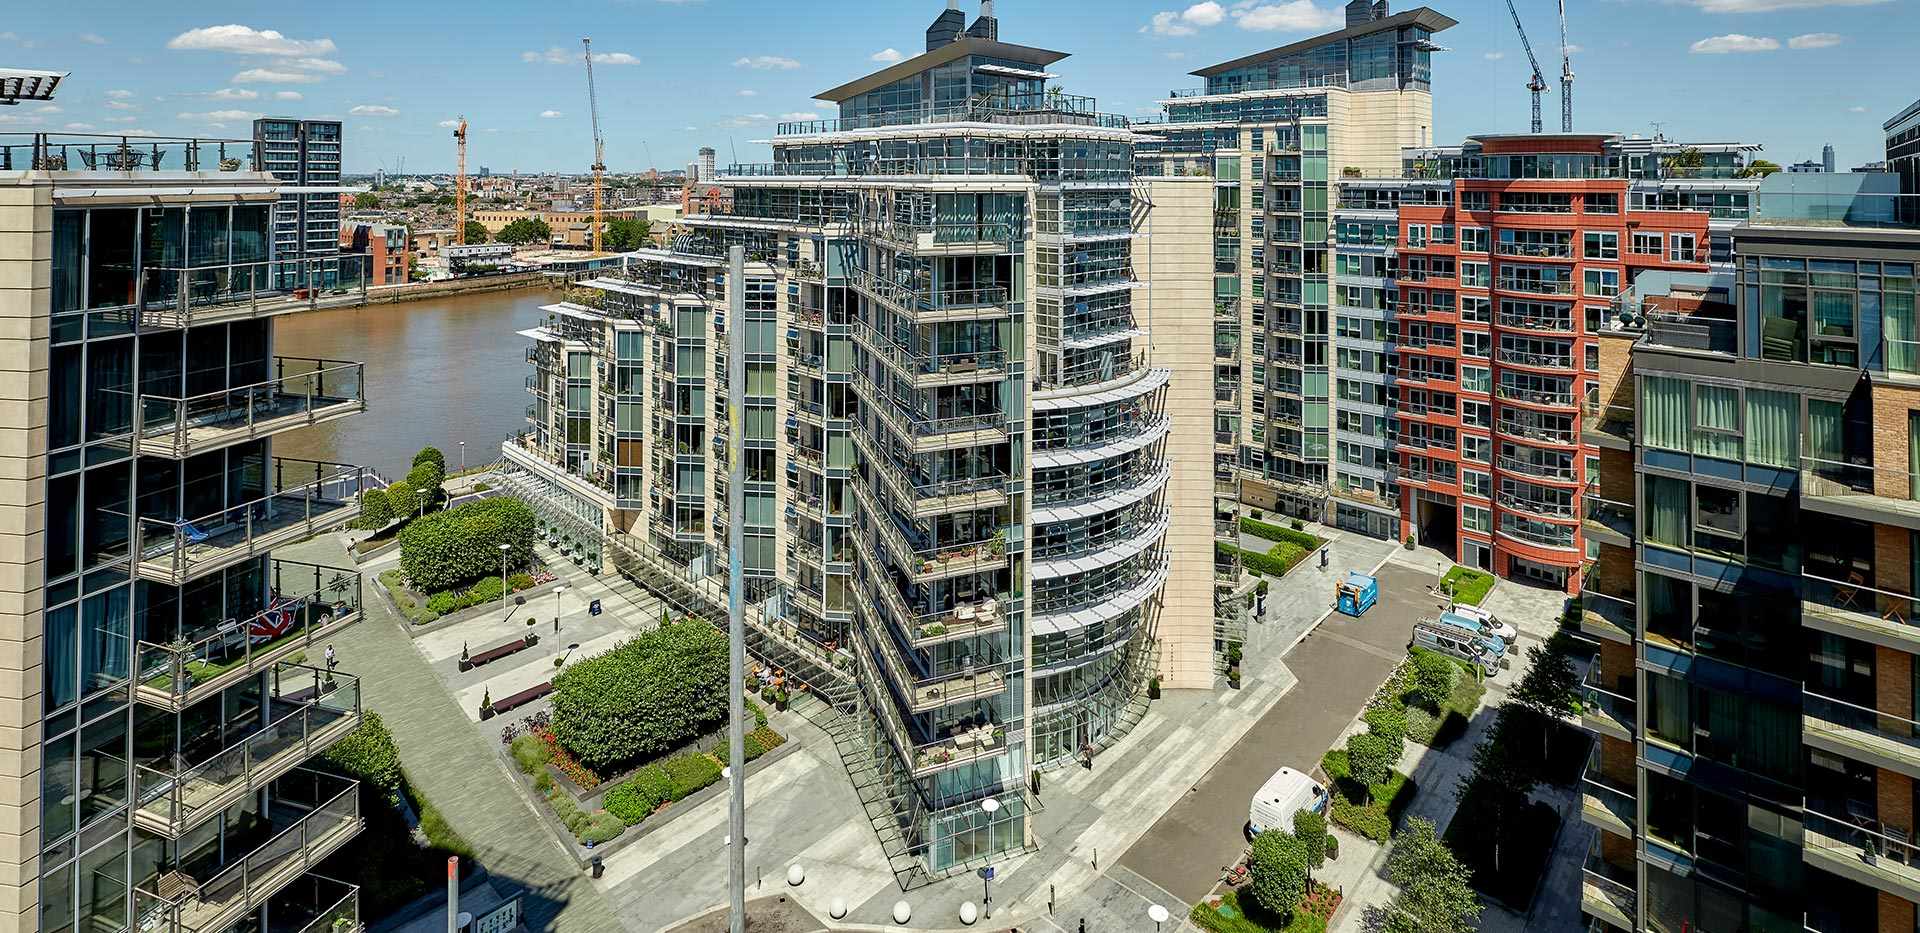 St George, Battersea Reach, Development Exerior, Discovery House Level 10